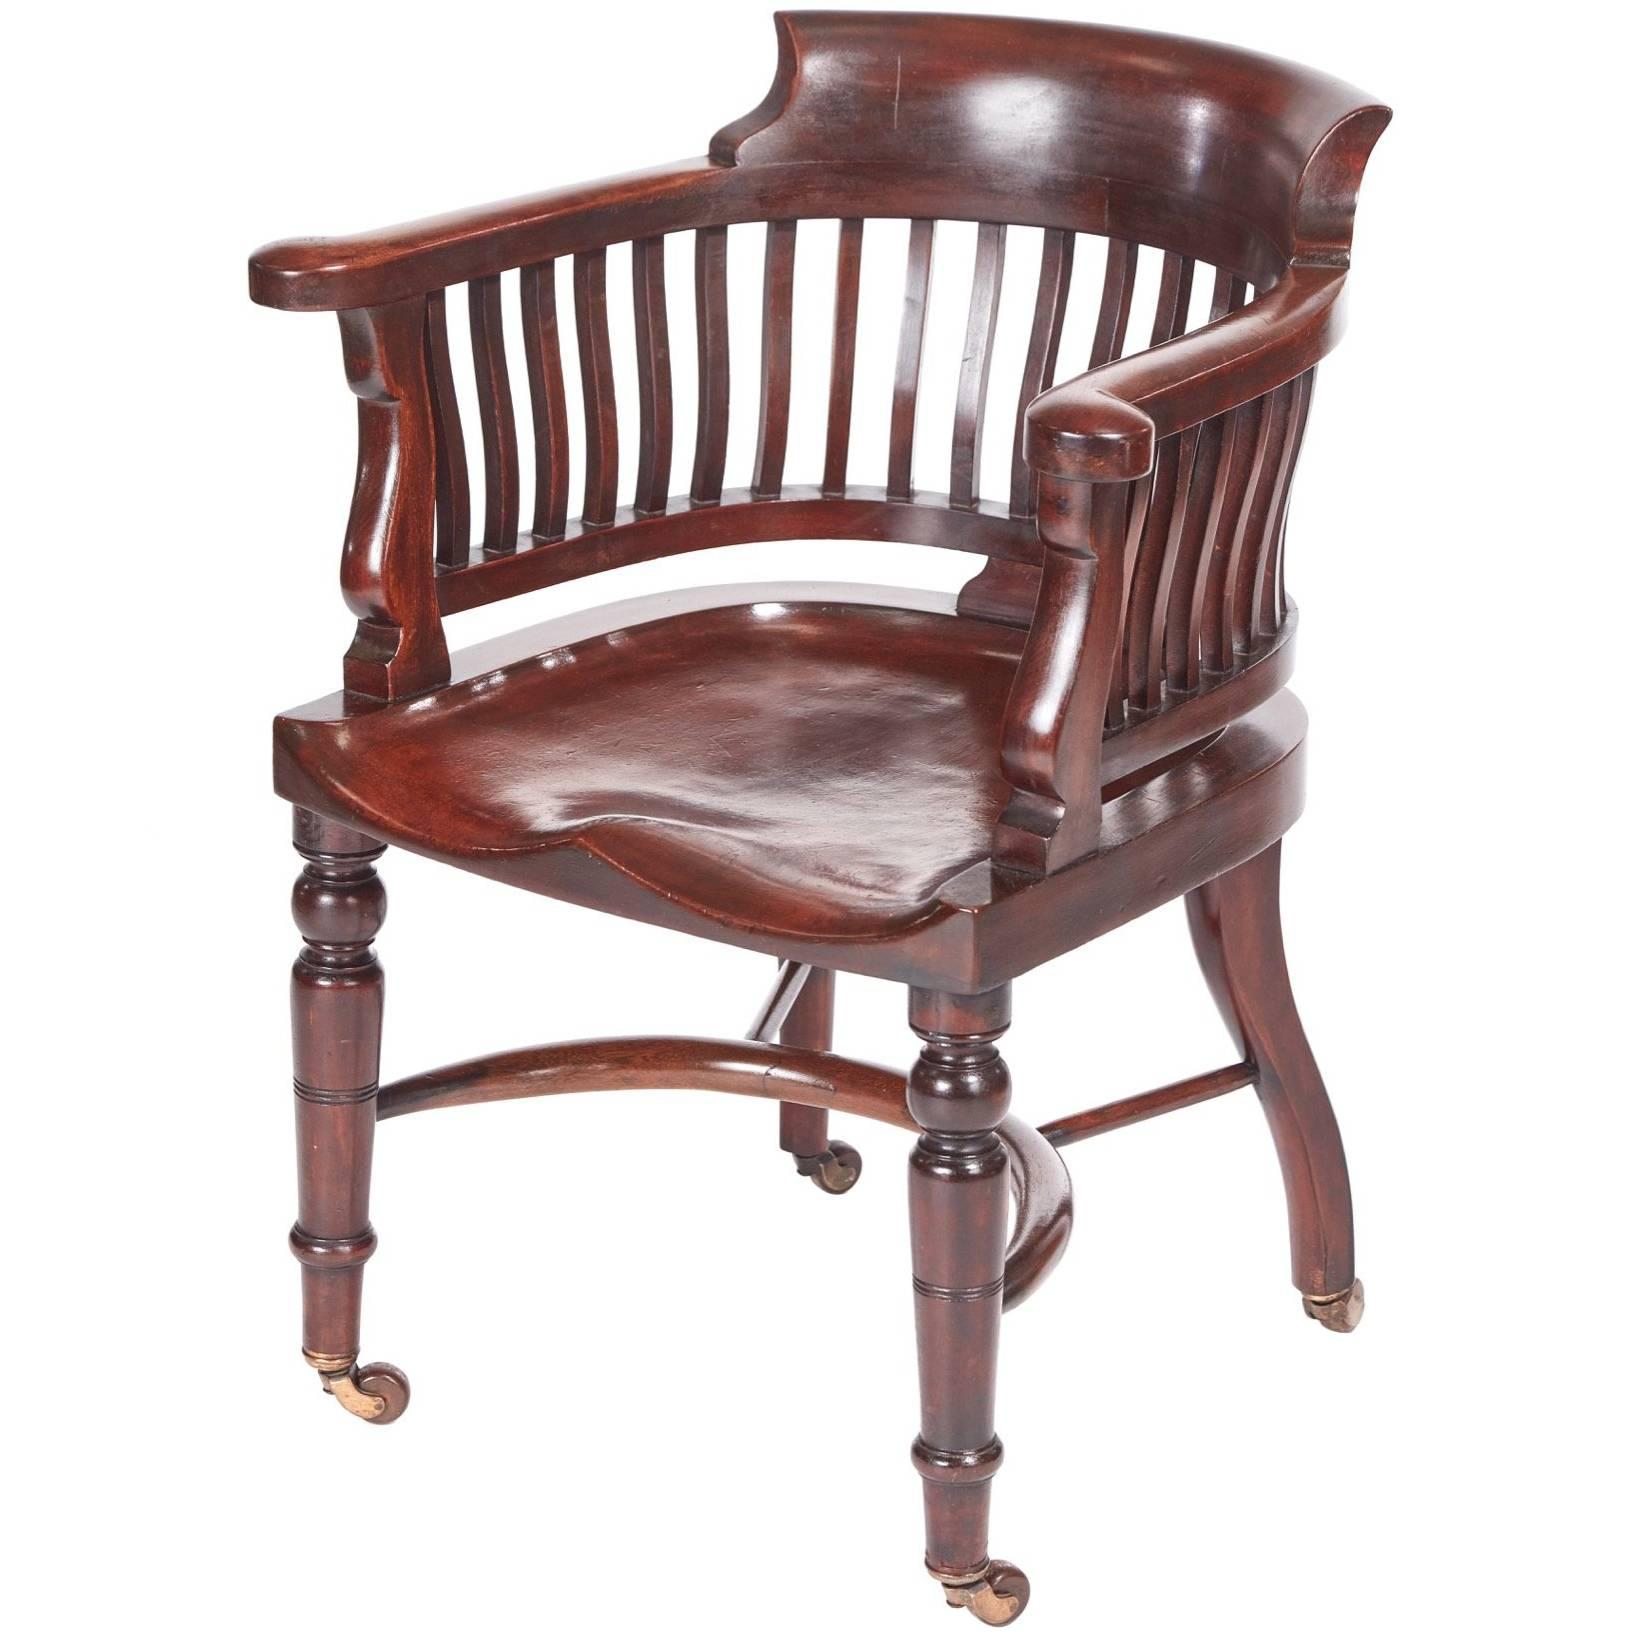 Outstanding Quality Victorian Mahogany Desk Chair For Sale